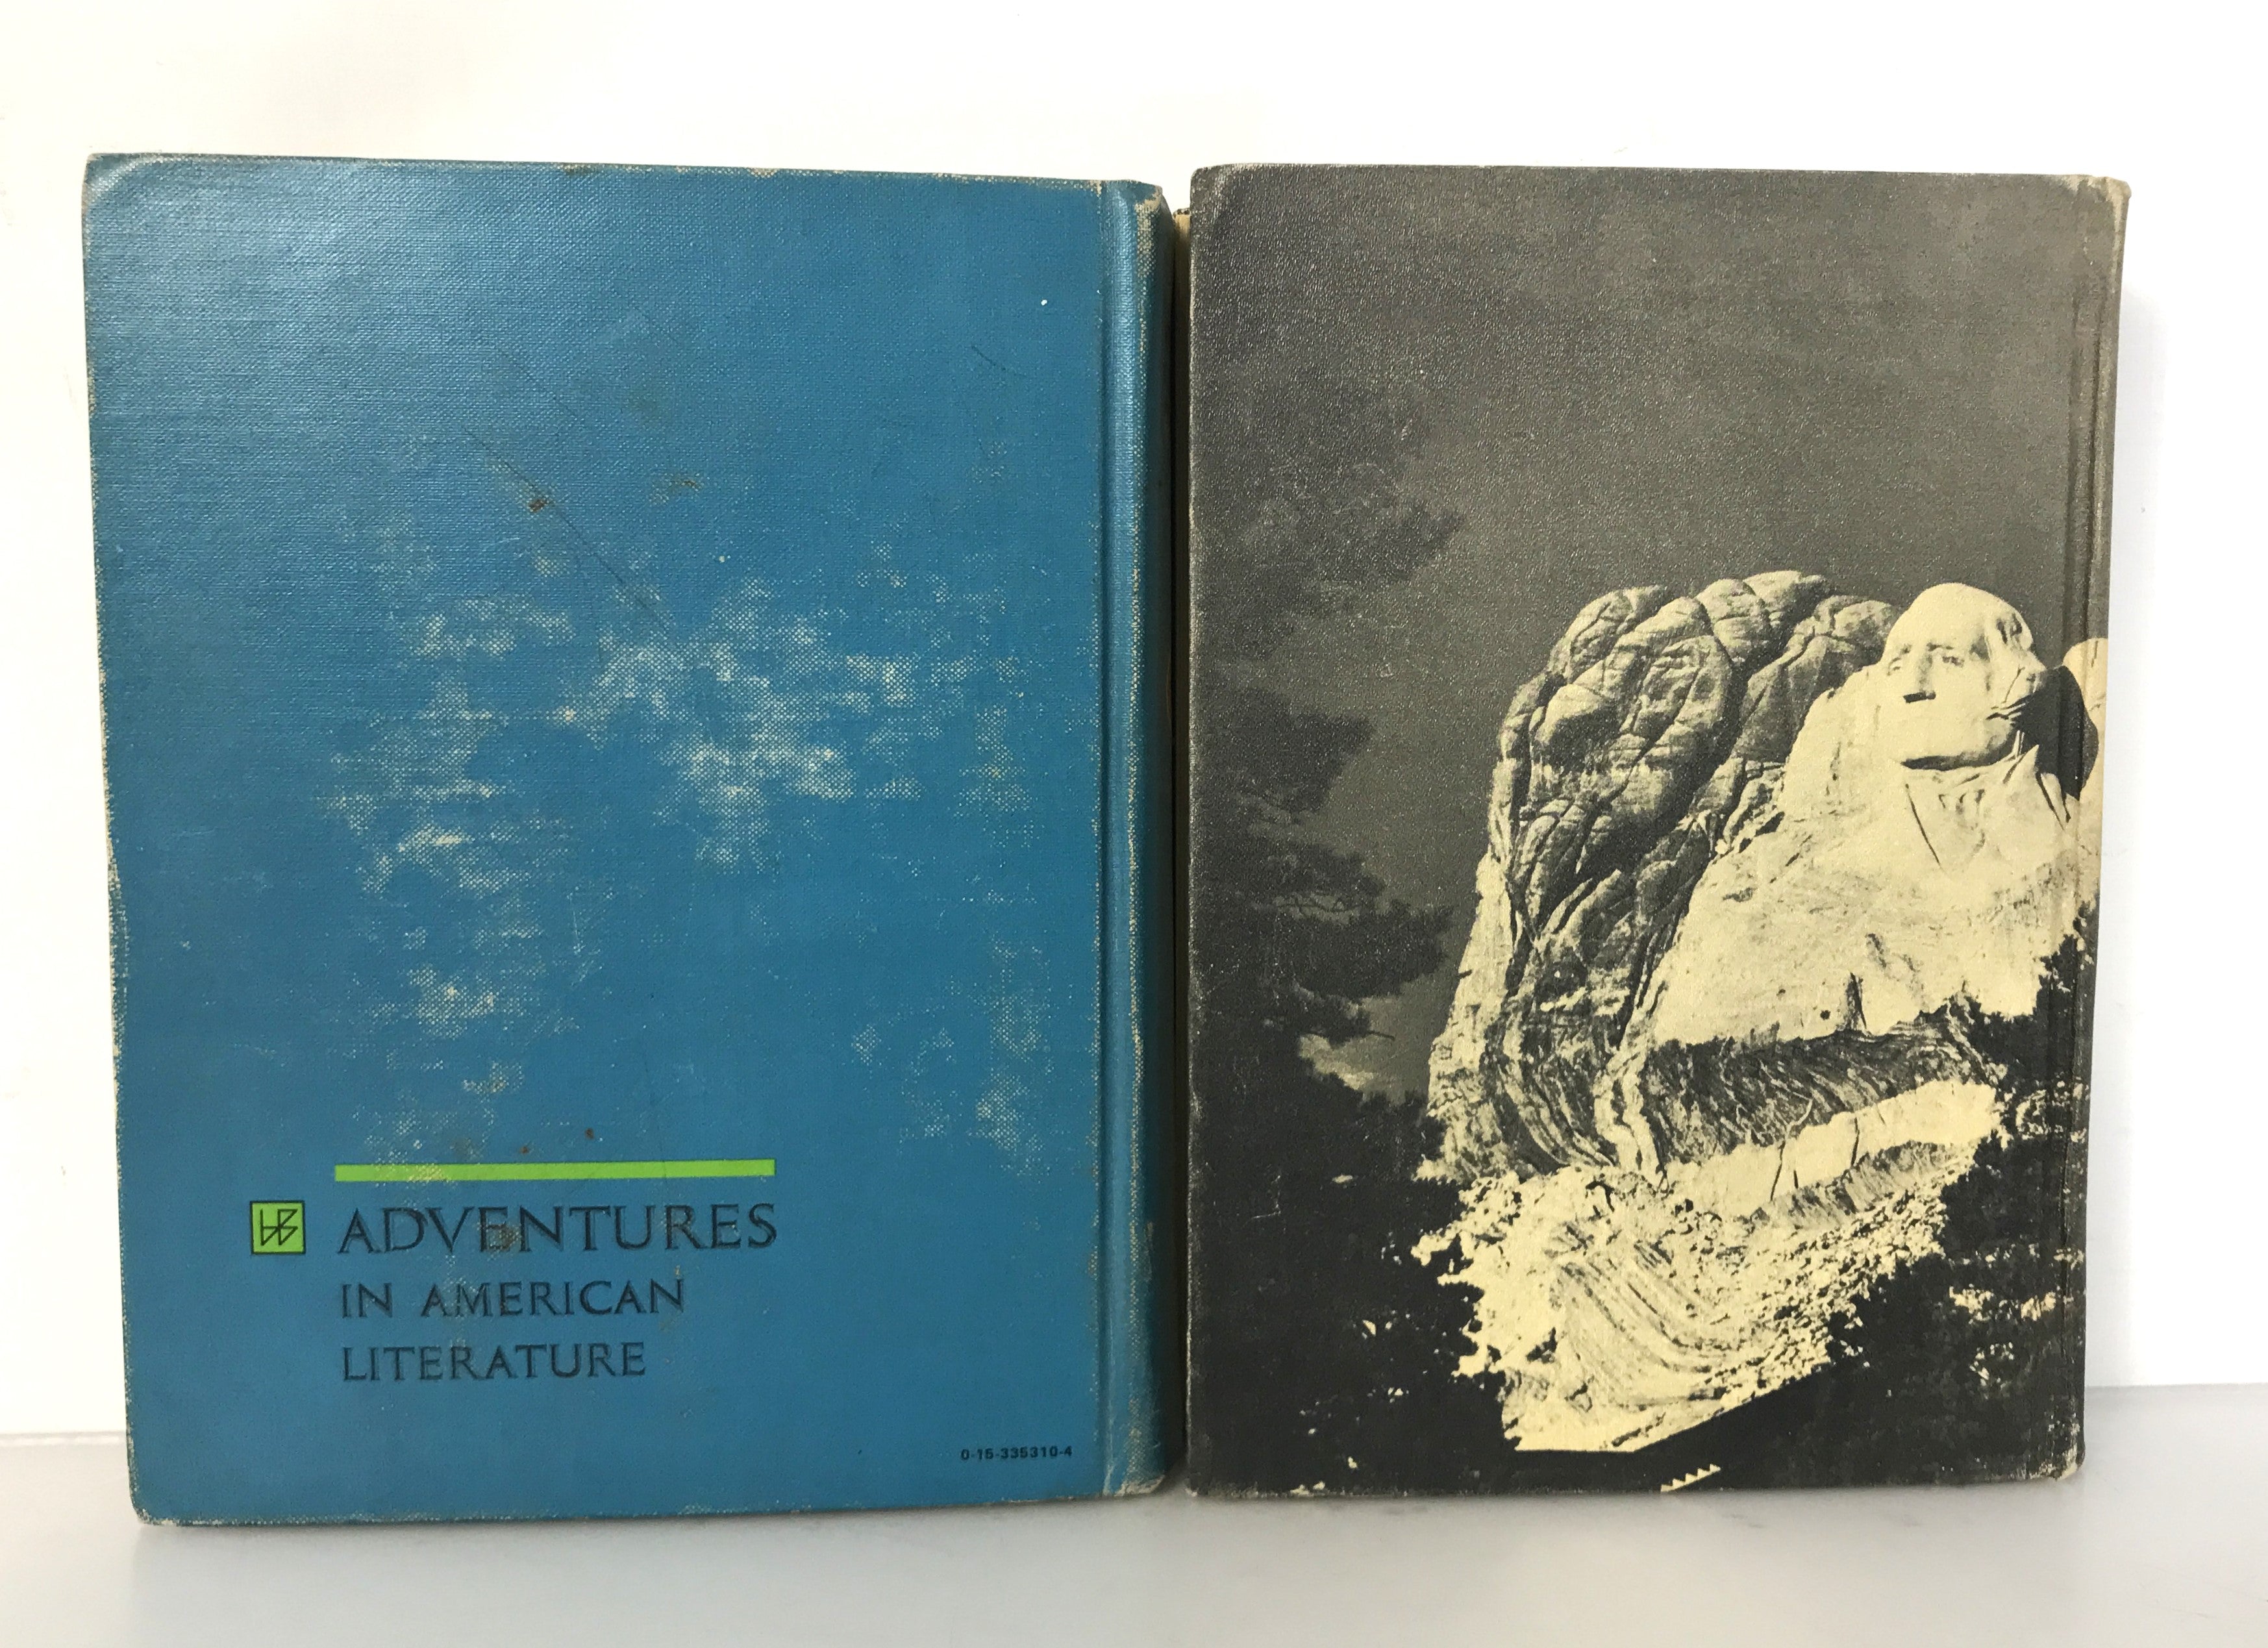 Lot of 2 Reading Textbooks People in Literature and Adventures in American Literature 1950, 1968 HC